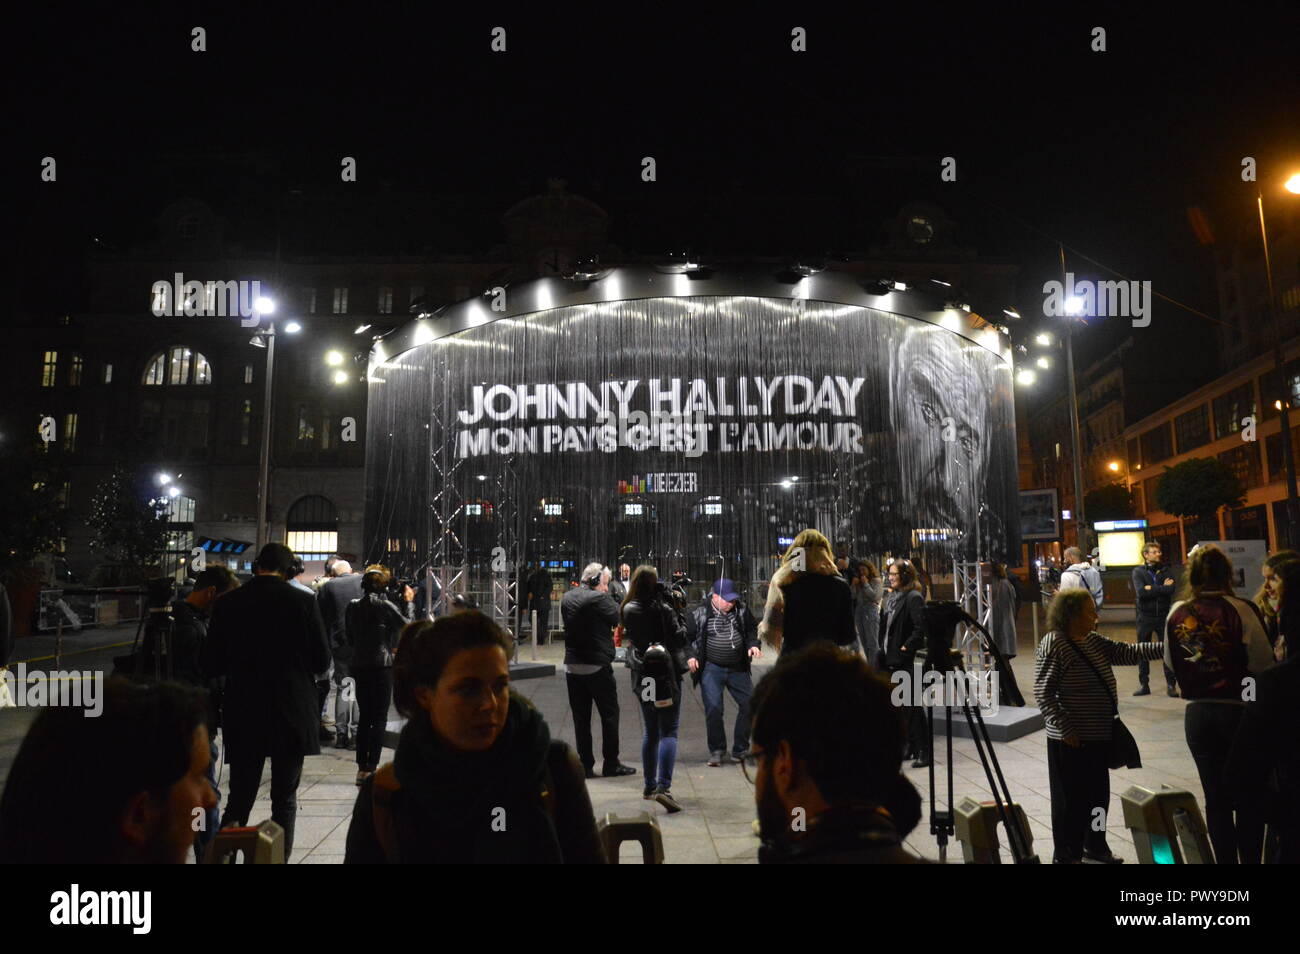 Paris, France. 19th October, 2018. Warner Bros Music France releases at midnight the posthumous album of Jean-Philippe Smet alias Johnny Hallyday 'Mon pays c'est l'amour' (my country is love). StoresÂ (as the Fnac of the Champs-Elysees) opensÂ especially by night for fans, bikers or not. Deezer permits that the album can be listened outside the train station Gare Saint-Lazare. Night of 18 to 19 october 2018.  ALPHACIT NEWIM / Alamy Live News Stock Photo